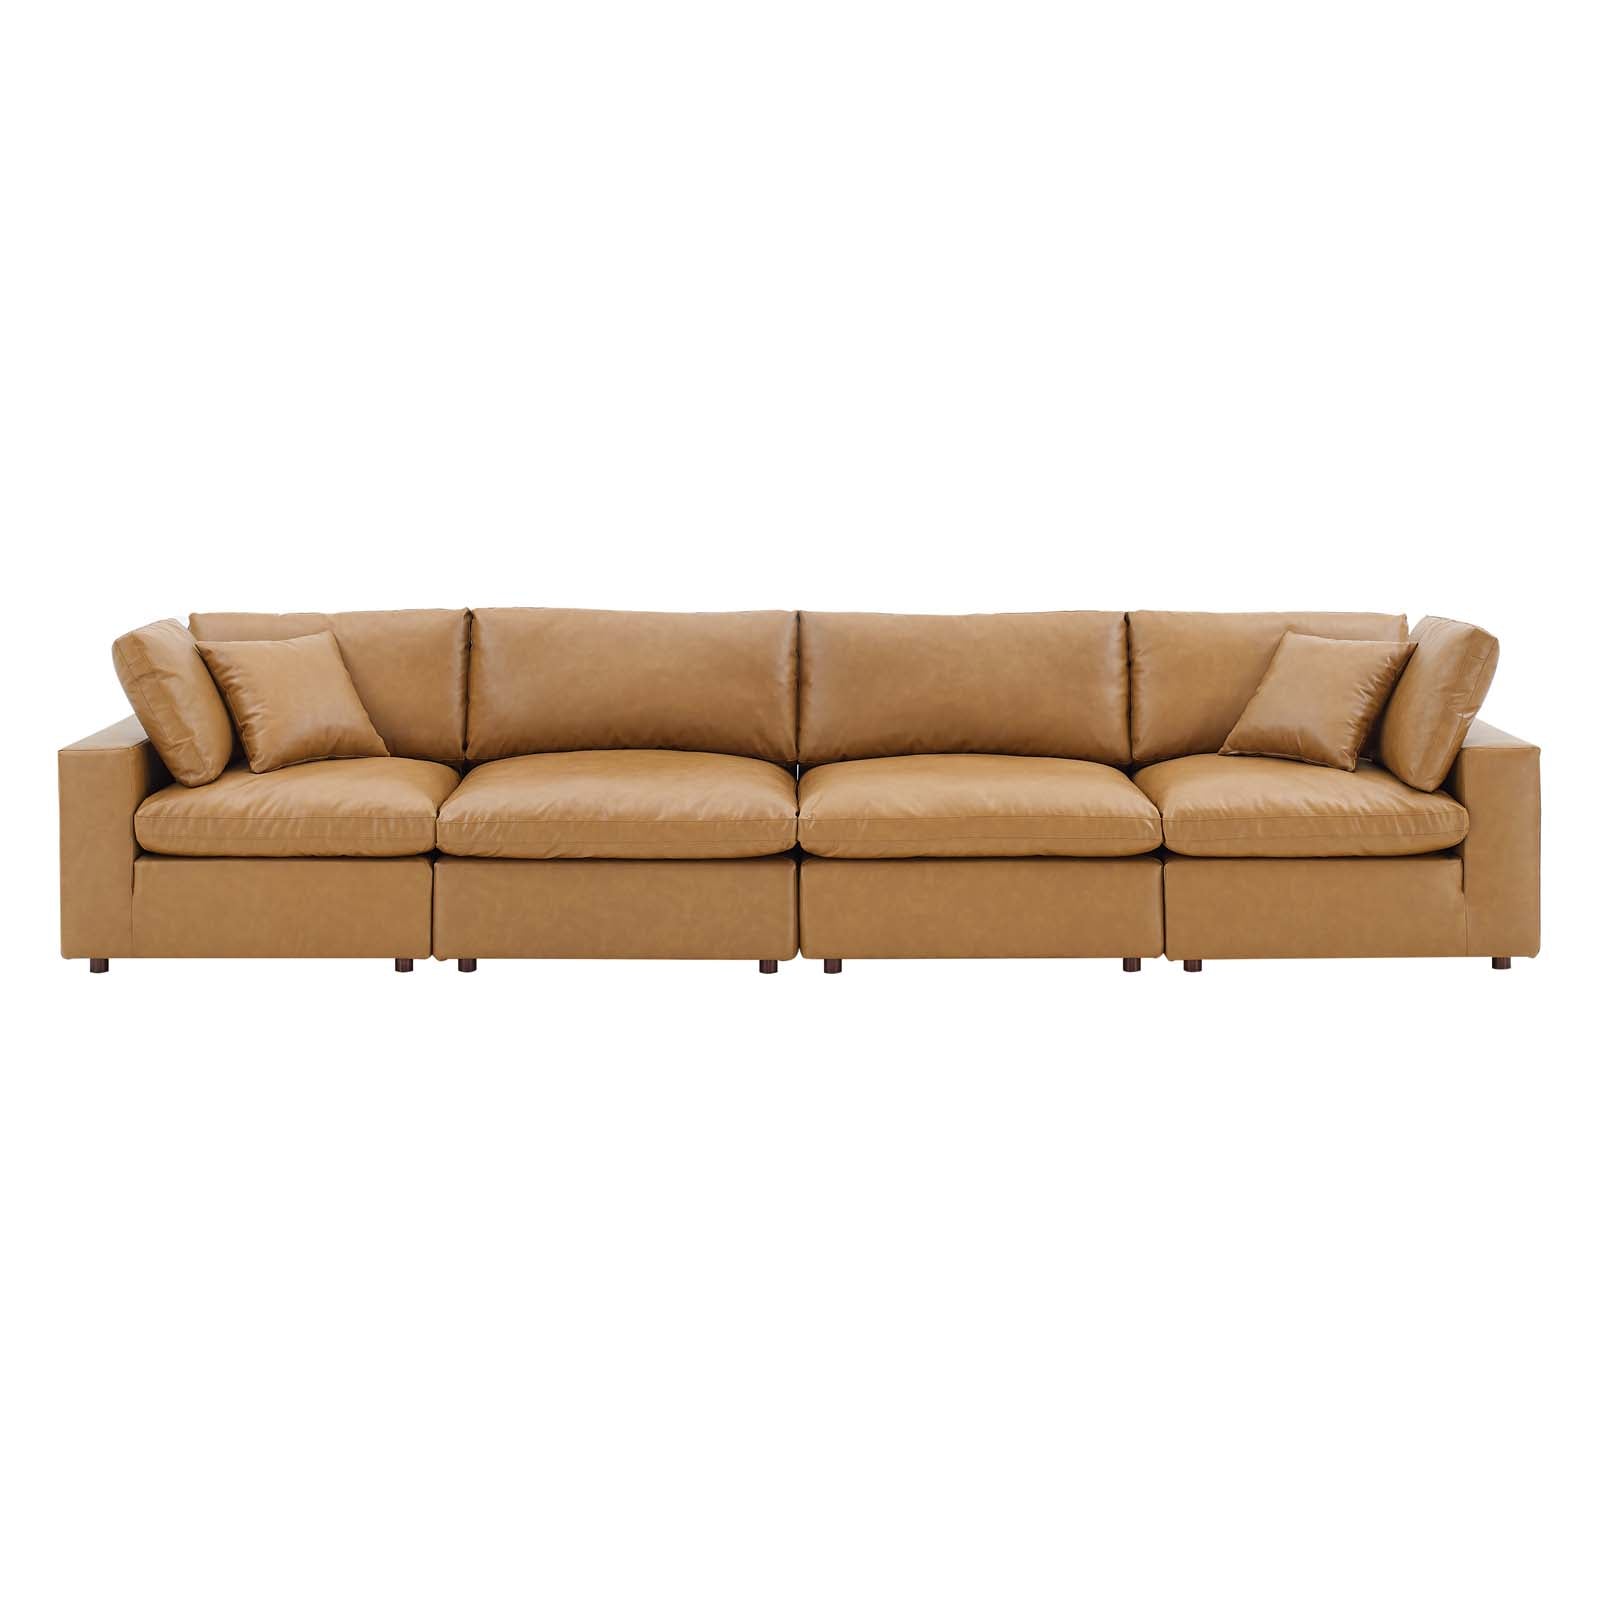 Modway Sofas & Couches - Commix Down Filled Overstuffed Vegan Leather 4 Seater Sofa Tan